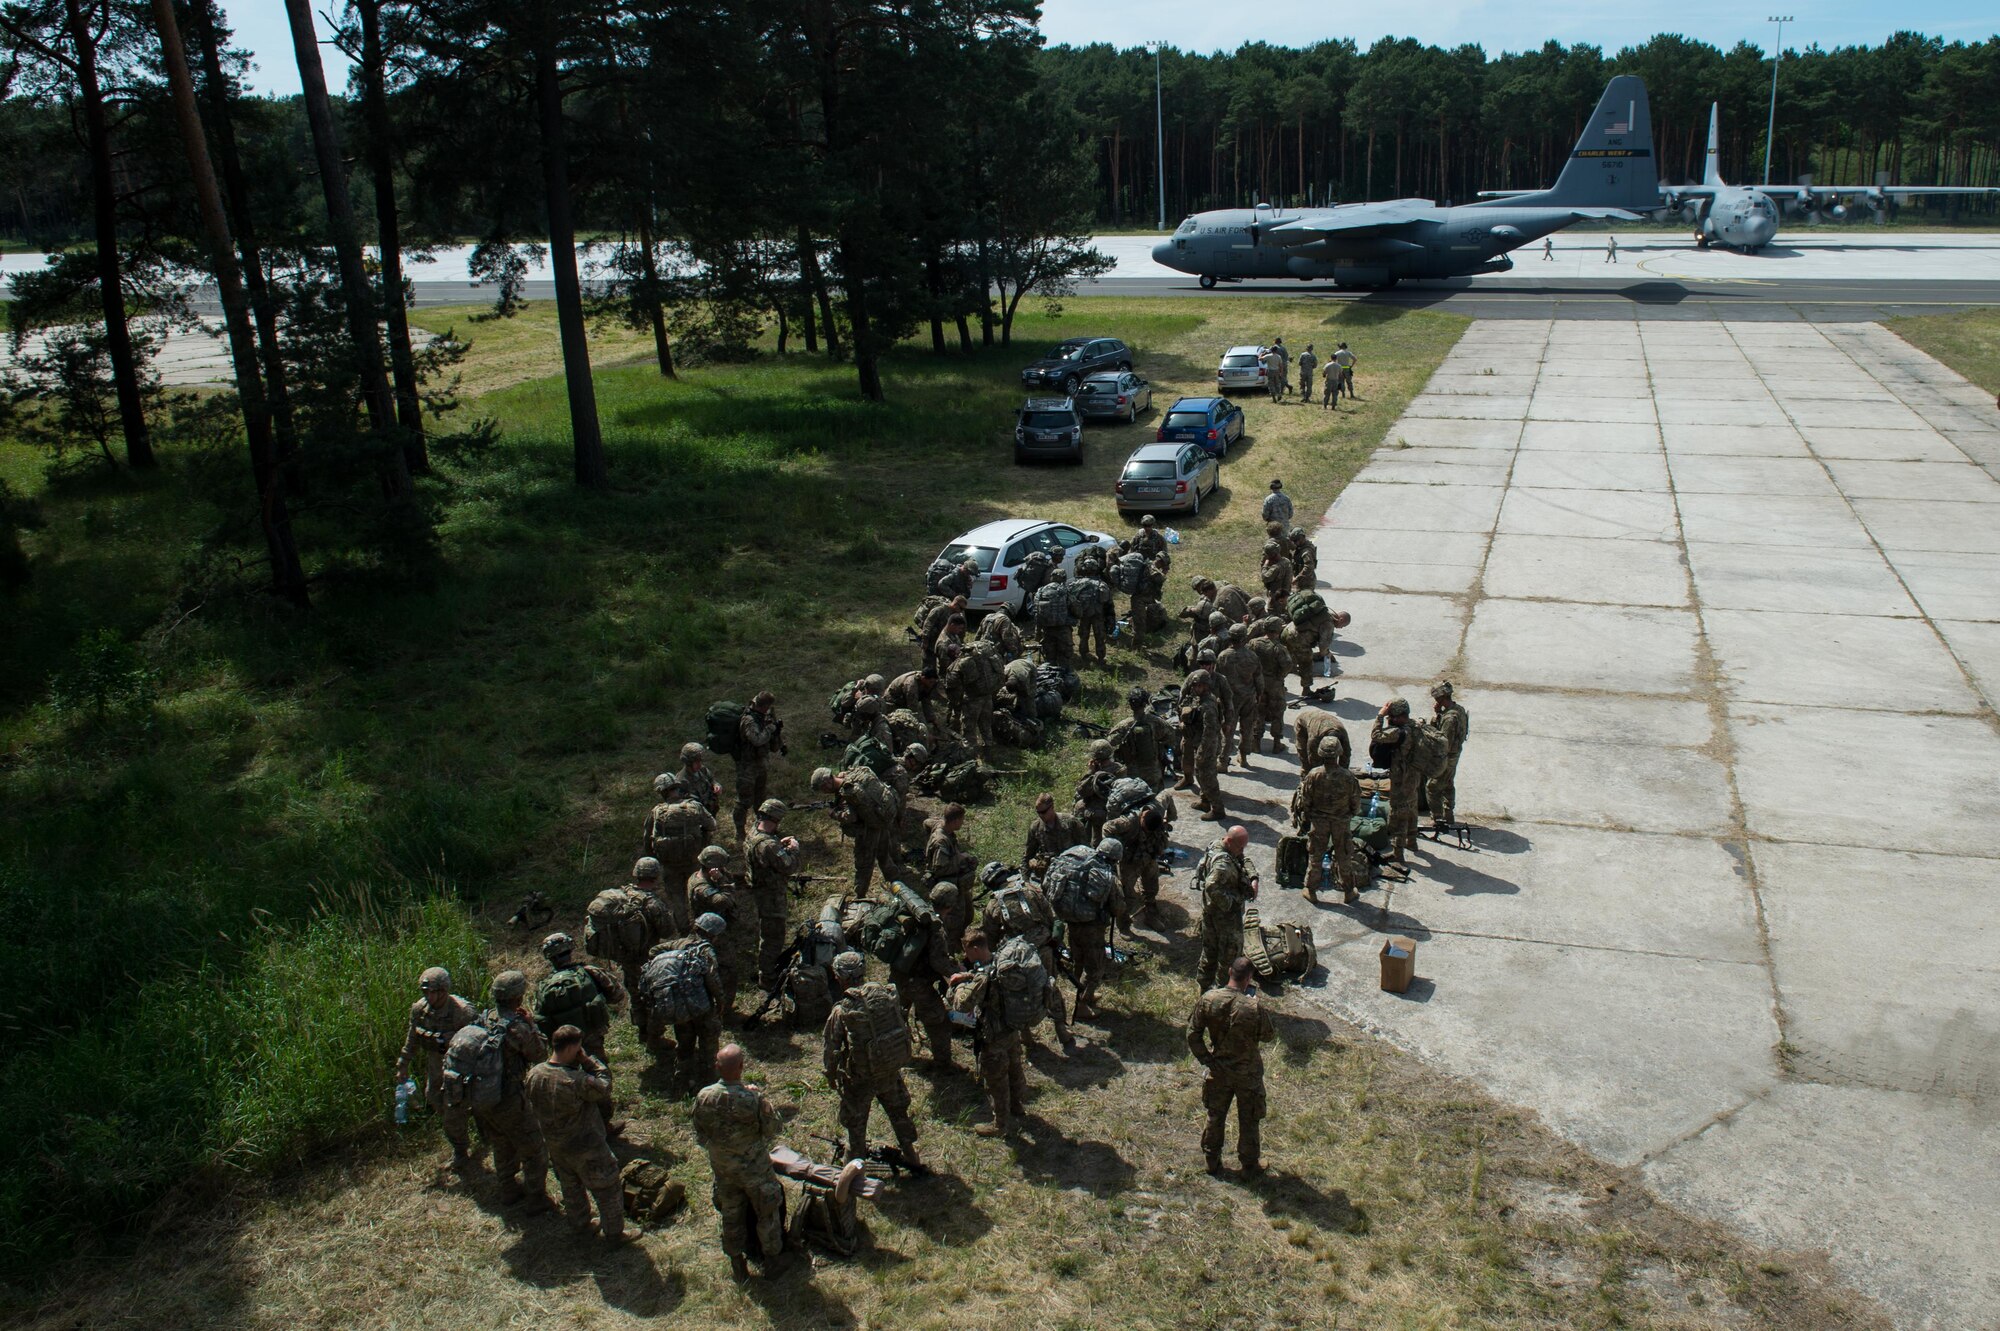 U.S. Soldiers assigned to the 82nd Airborne Division prepare to board a C-130 Hercules during Exercise Swift Response 16 at the Bydgoszcz Airport, Poland, June 9, 2016. Exercise SR16 is one of the premier military crisis response training events for multinational airborne forces in the world, the exercise has more than 5,000 participants from 10 NATO nations. (U.S. Air Force photo by Master Sgt. Joseph Swafford/Released)